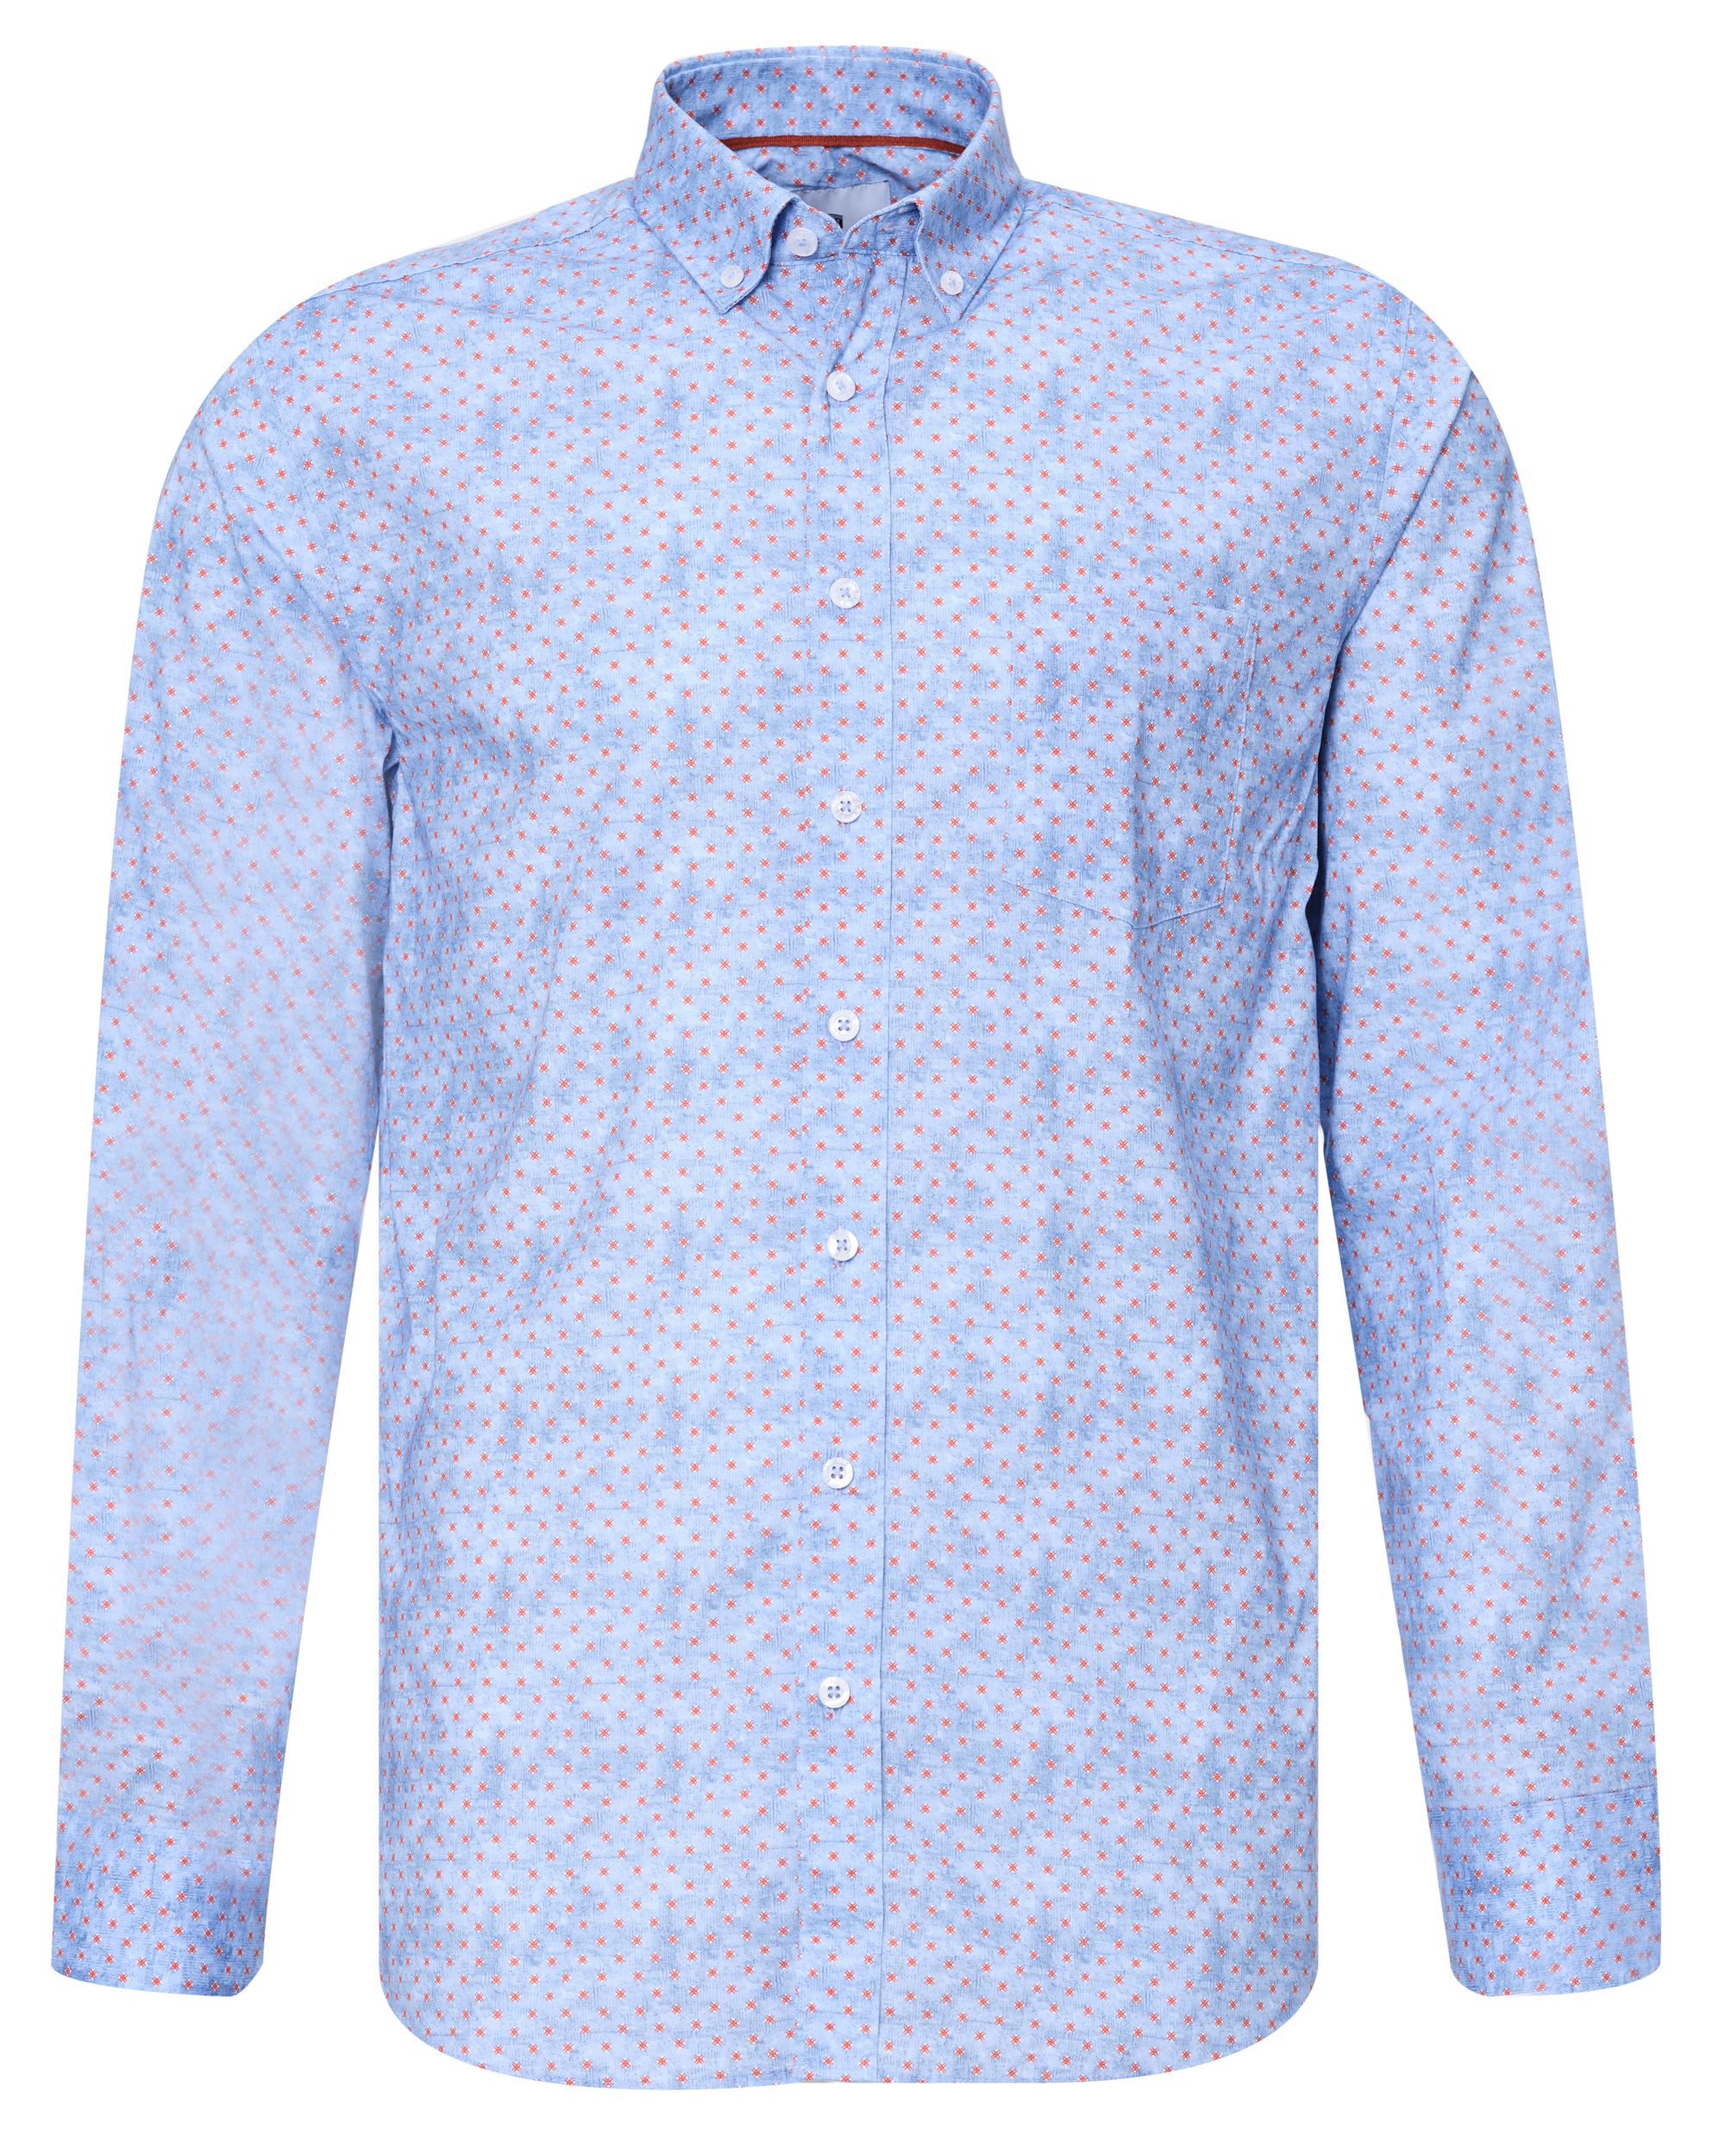 State of Art Casual Overhemd LM Blauw 075866-001-4XL